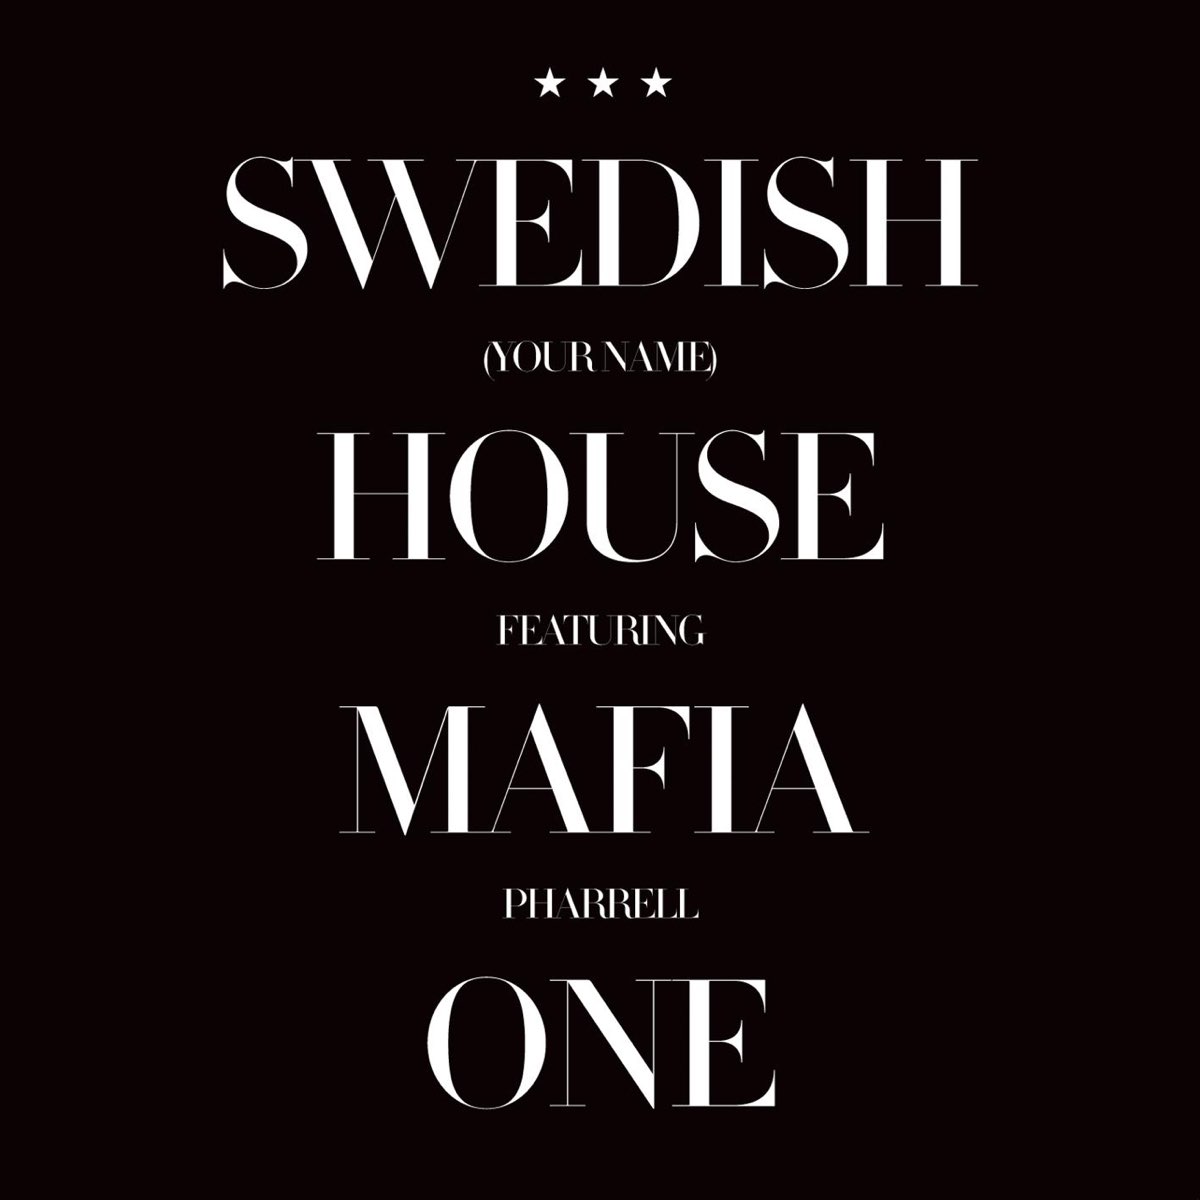 ‎One (Your Name) [feat. Pharrell] by Swedish House Mafia on Apple Music